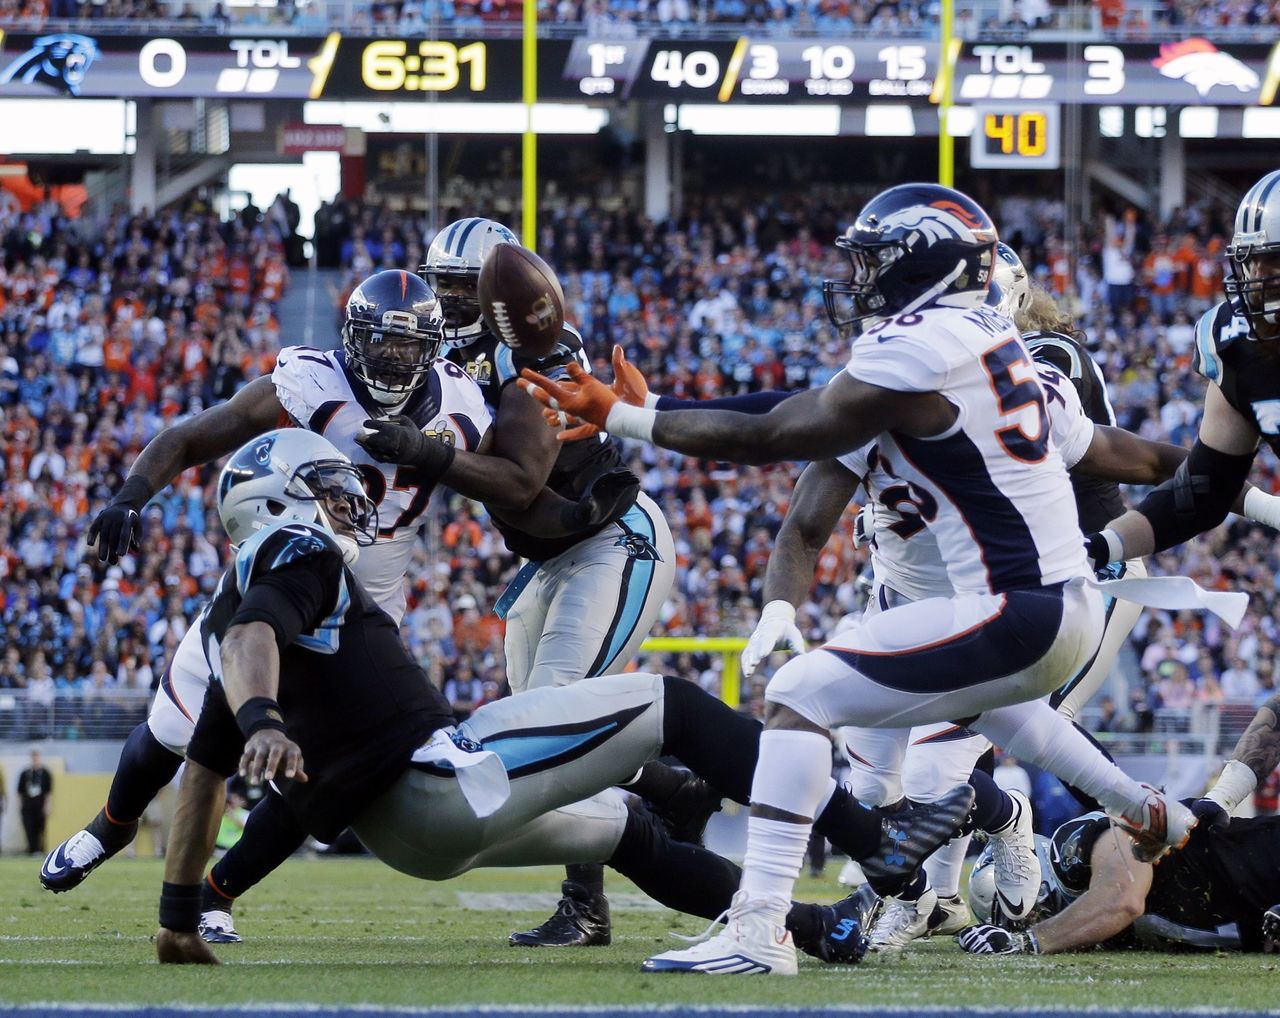 Panthers quarterback Cam Newton (1) fumbles the ball as he is sacked by the Broncos’ Von Miller (58) in the first quarter. Denver recovered the fumble for a touchdown in their 24-10 win over Carolina in the Super Bowl.